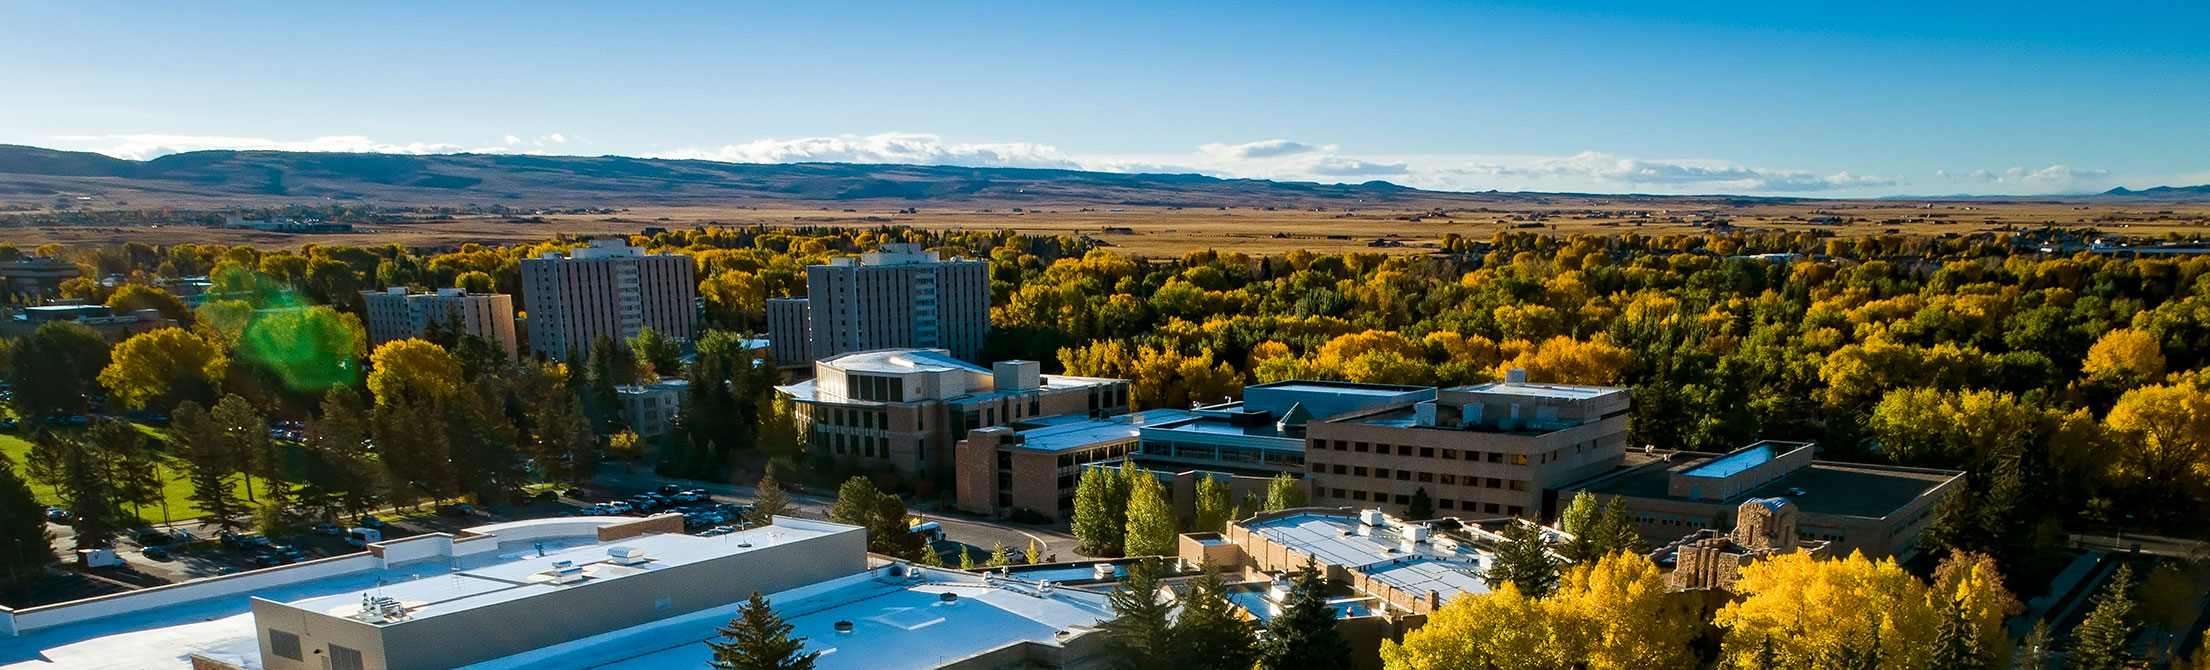 Aerial view of campus in the fall